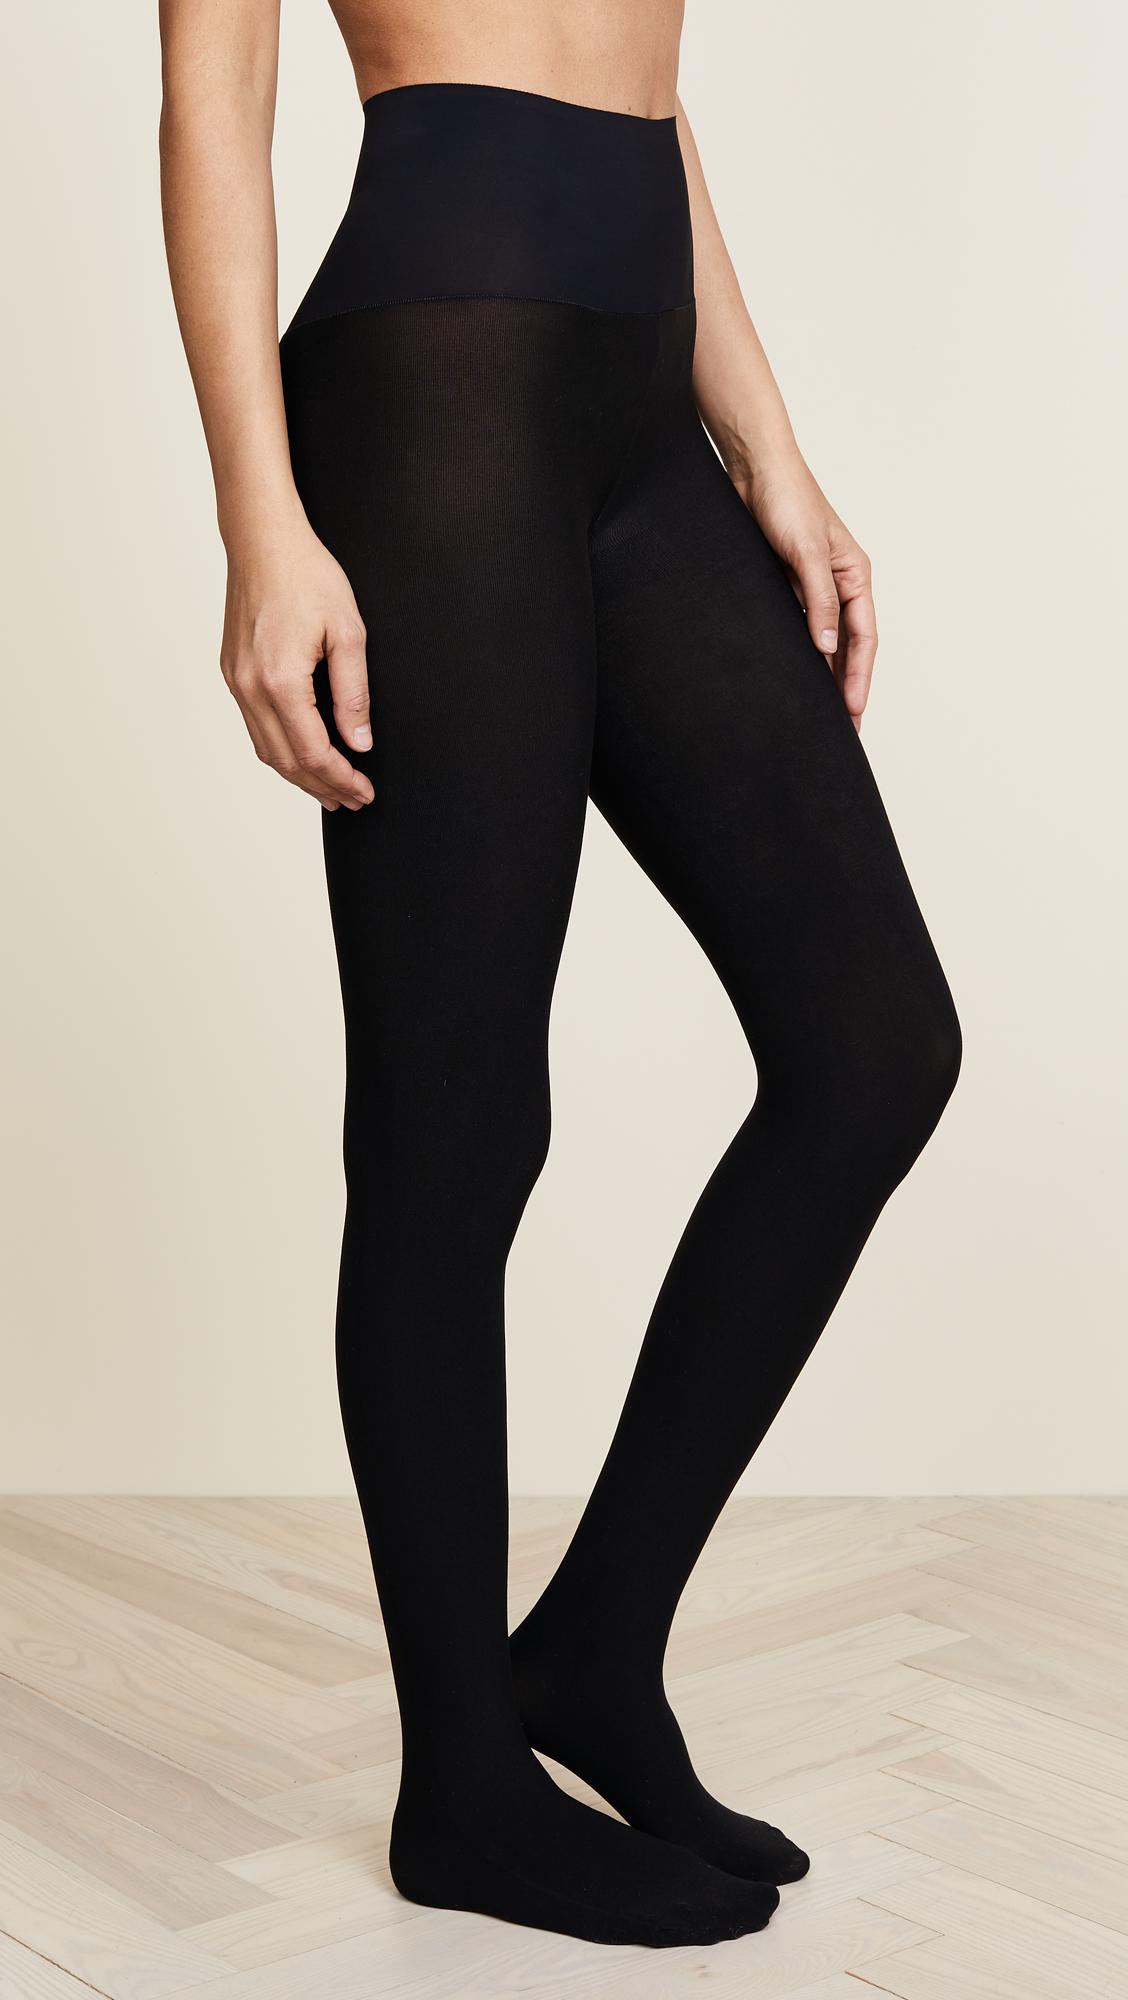 Commando Synthetic Perfectly Opaque Matte Tights in Black - Lyst